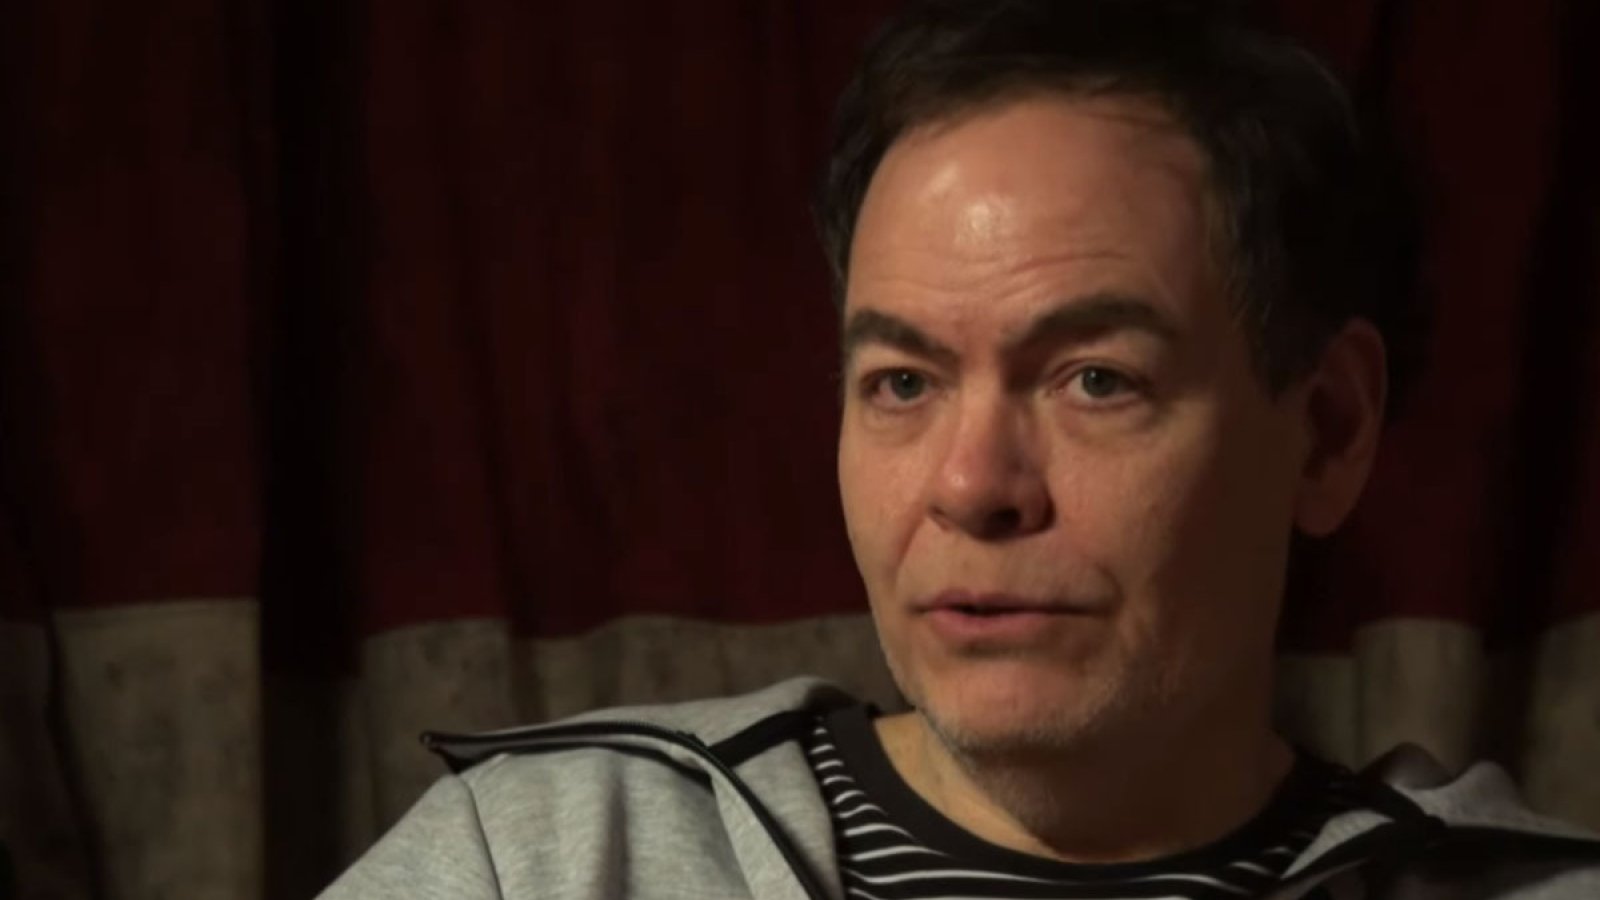 Bitcoin (BTC) Doesn't Seem Too Volatile After Today's Oil Plunge: Max Keiser